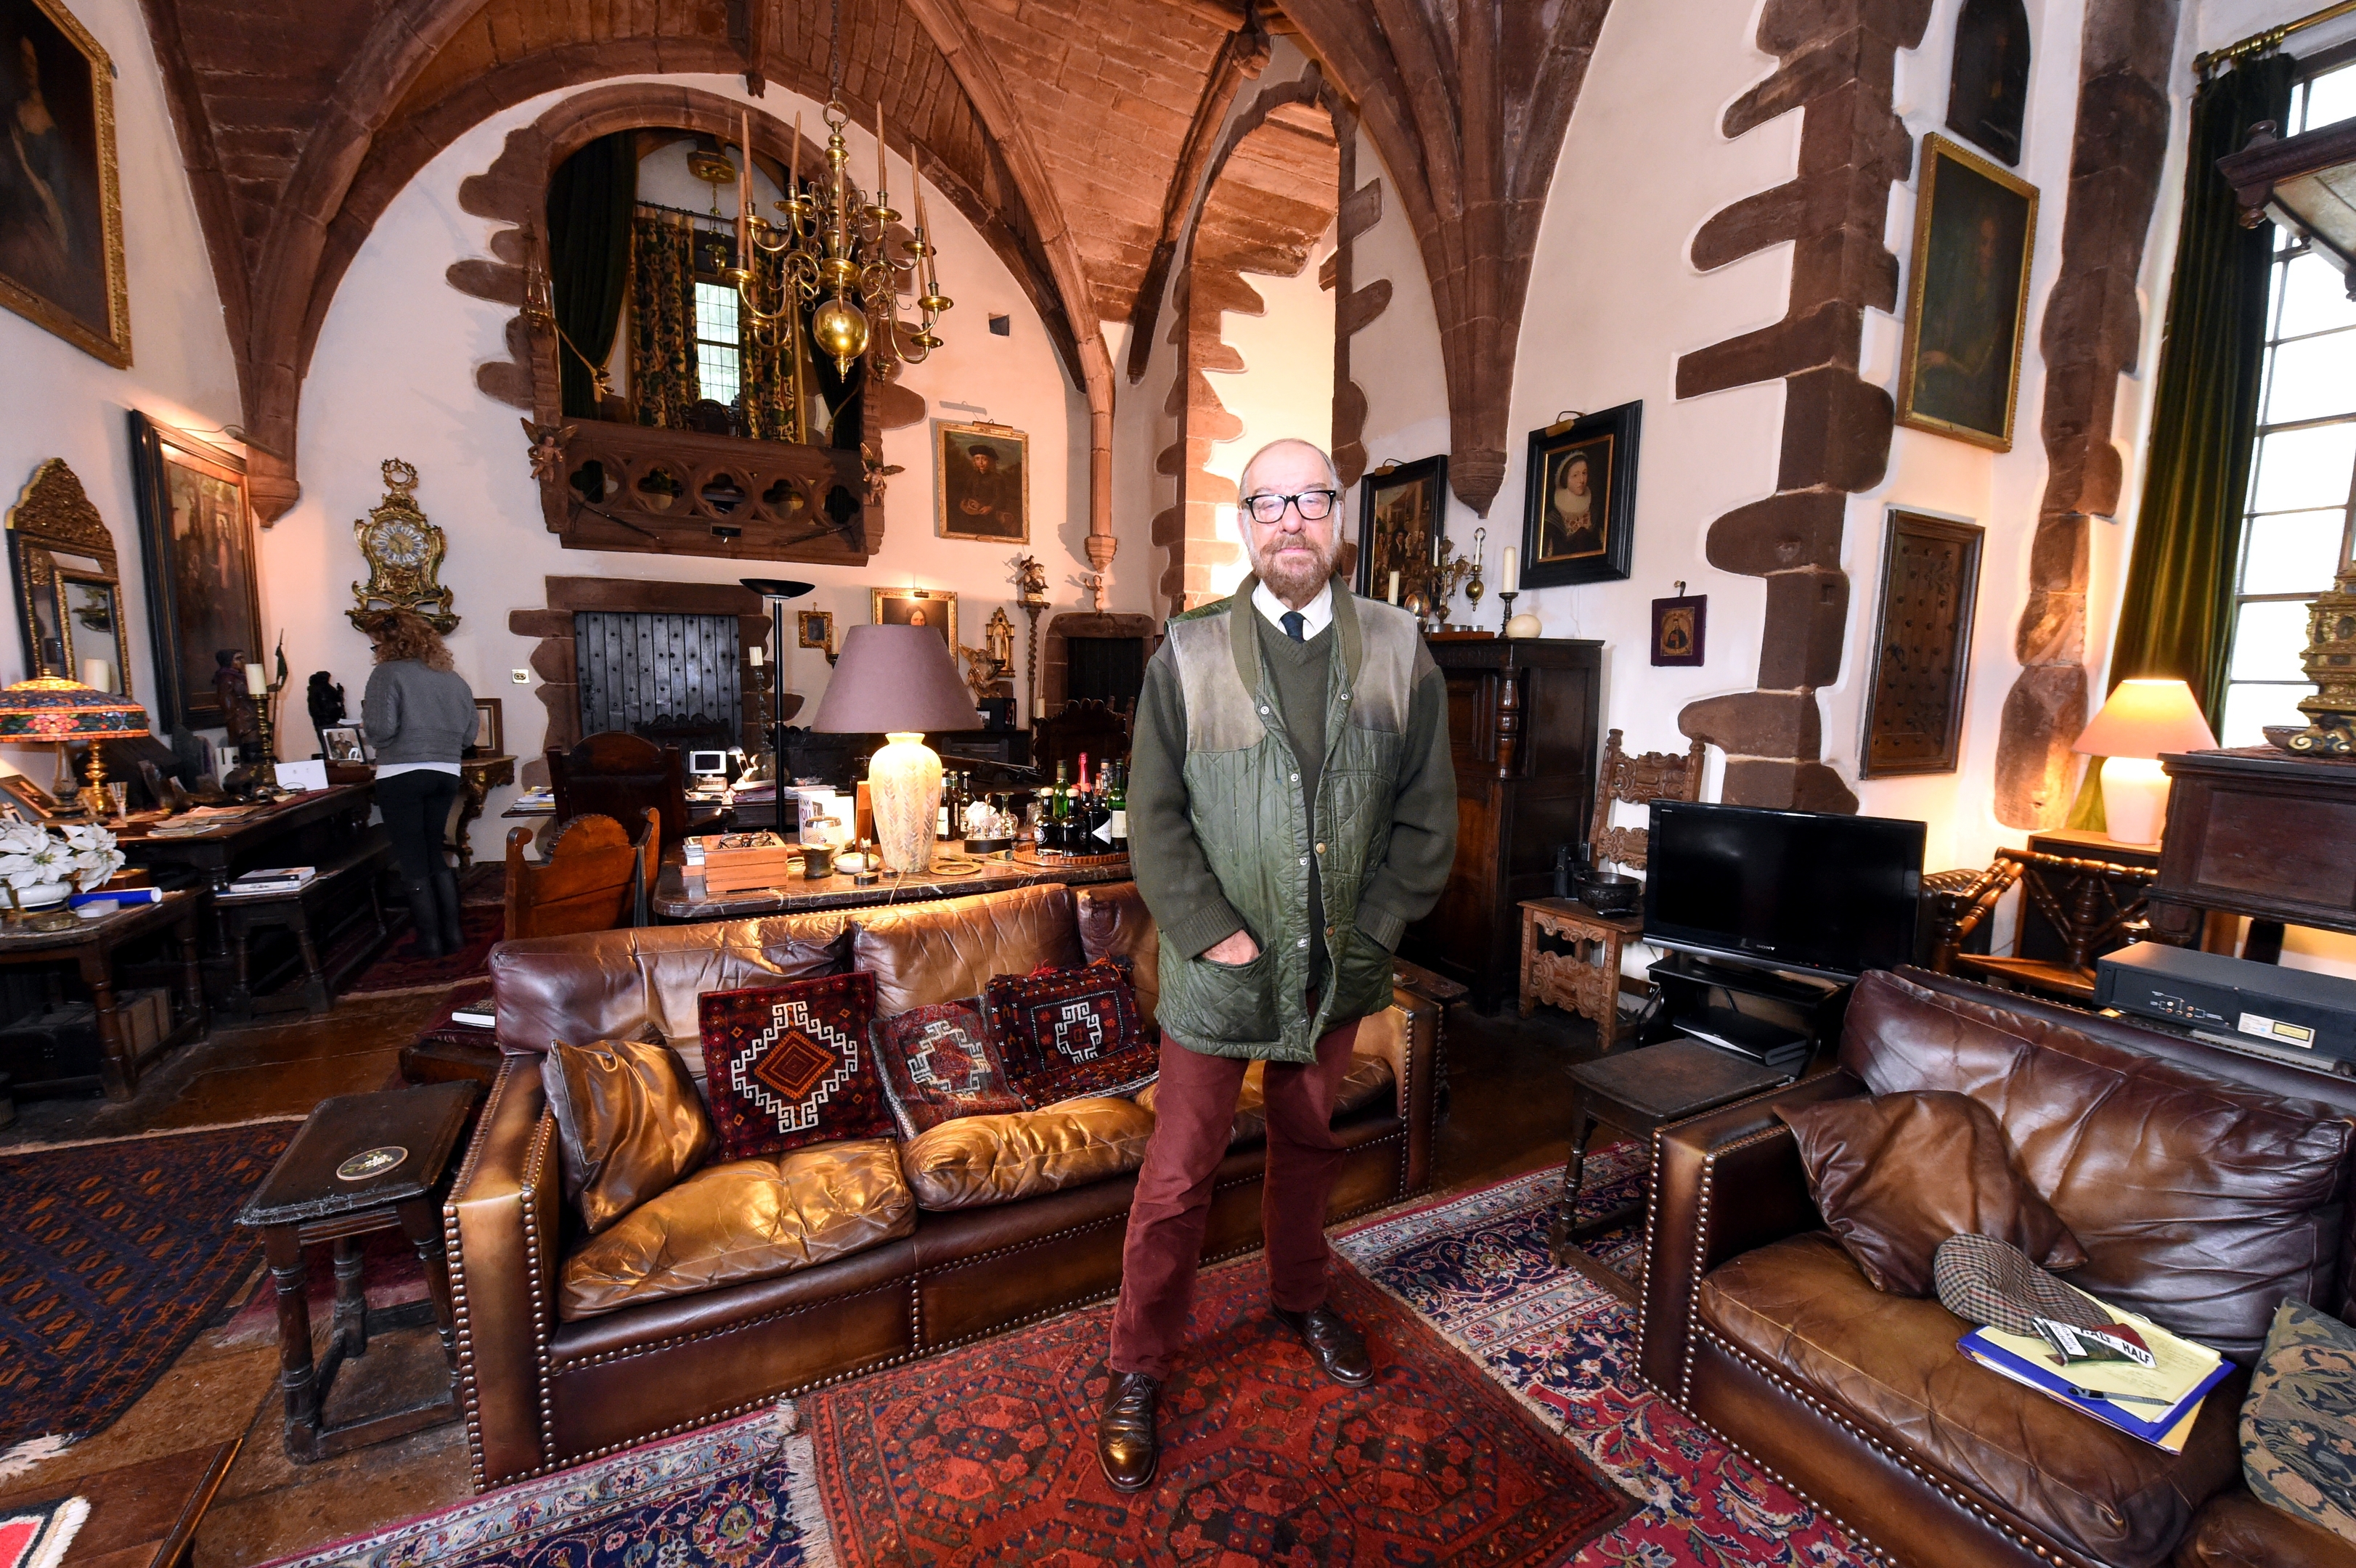 Marc Ellington inside his home, Towie Barclay Castle, which he completely restored